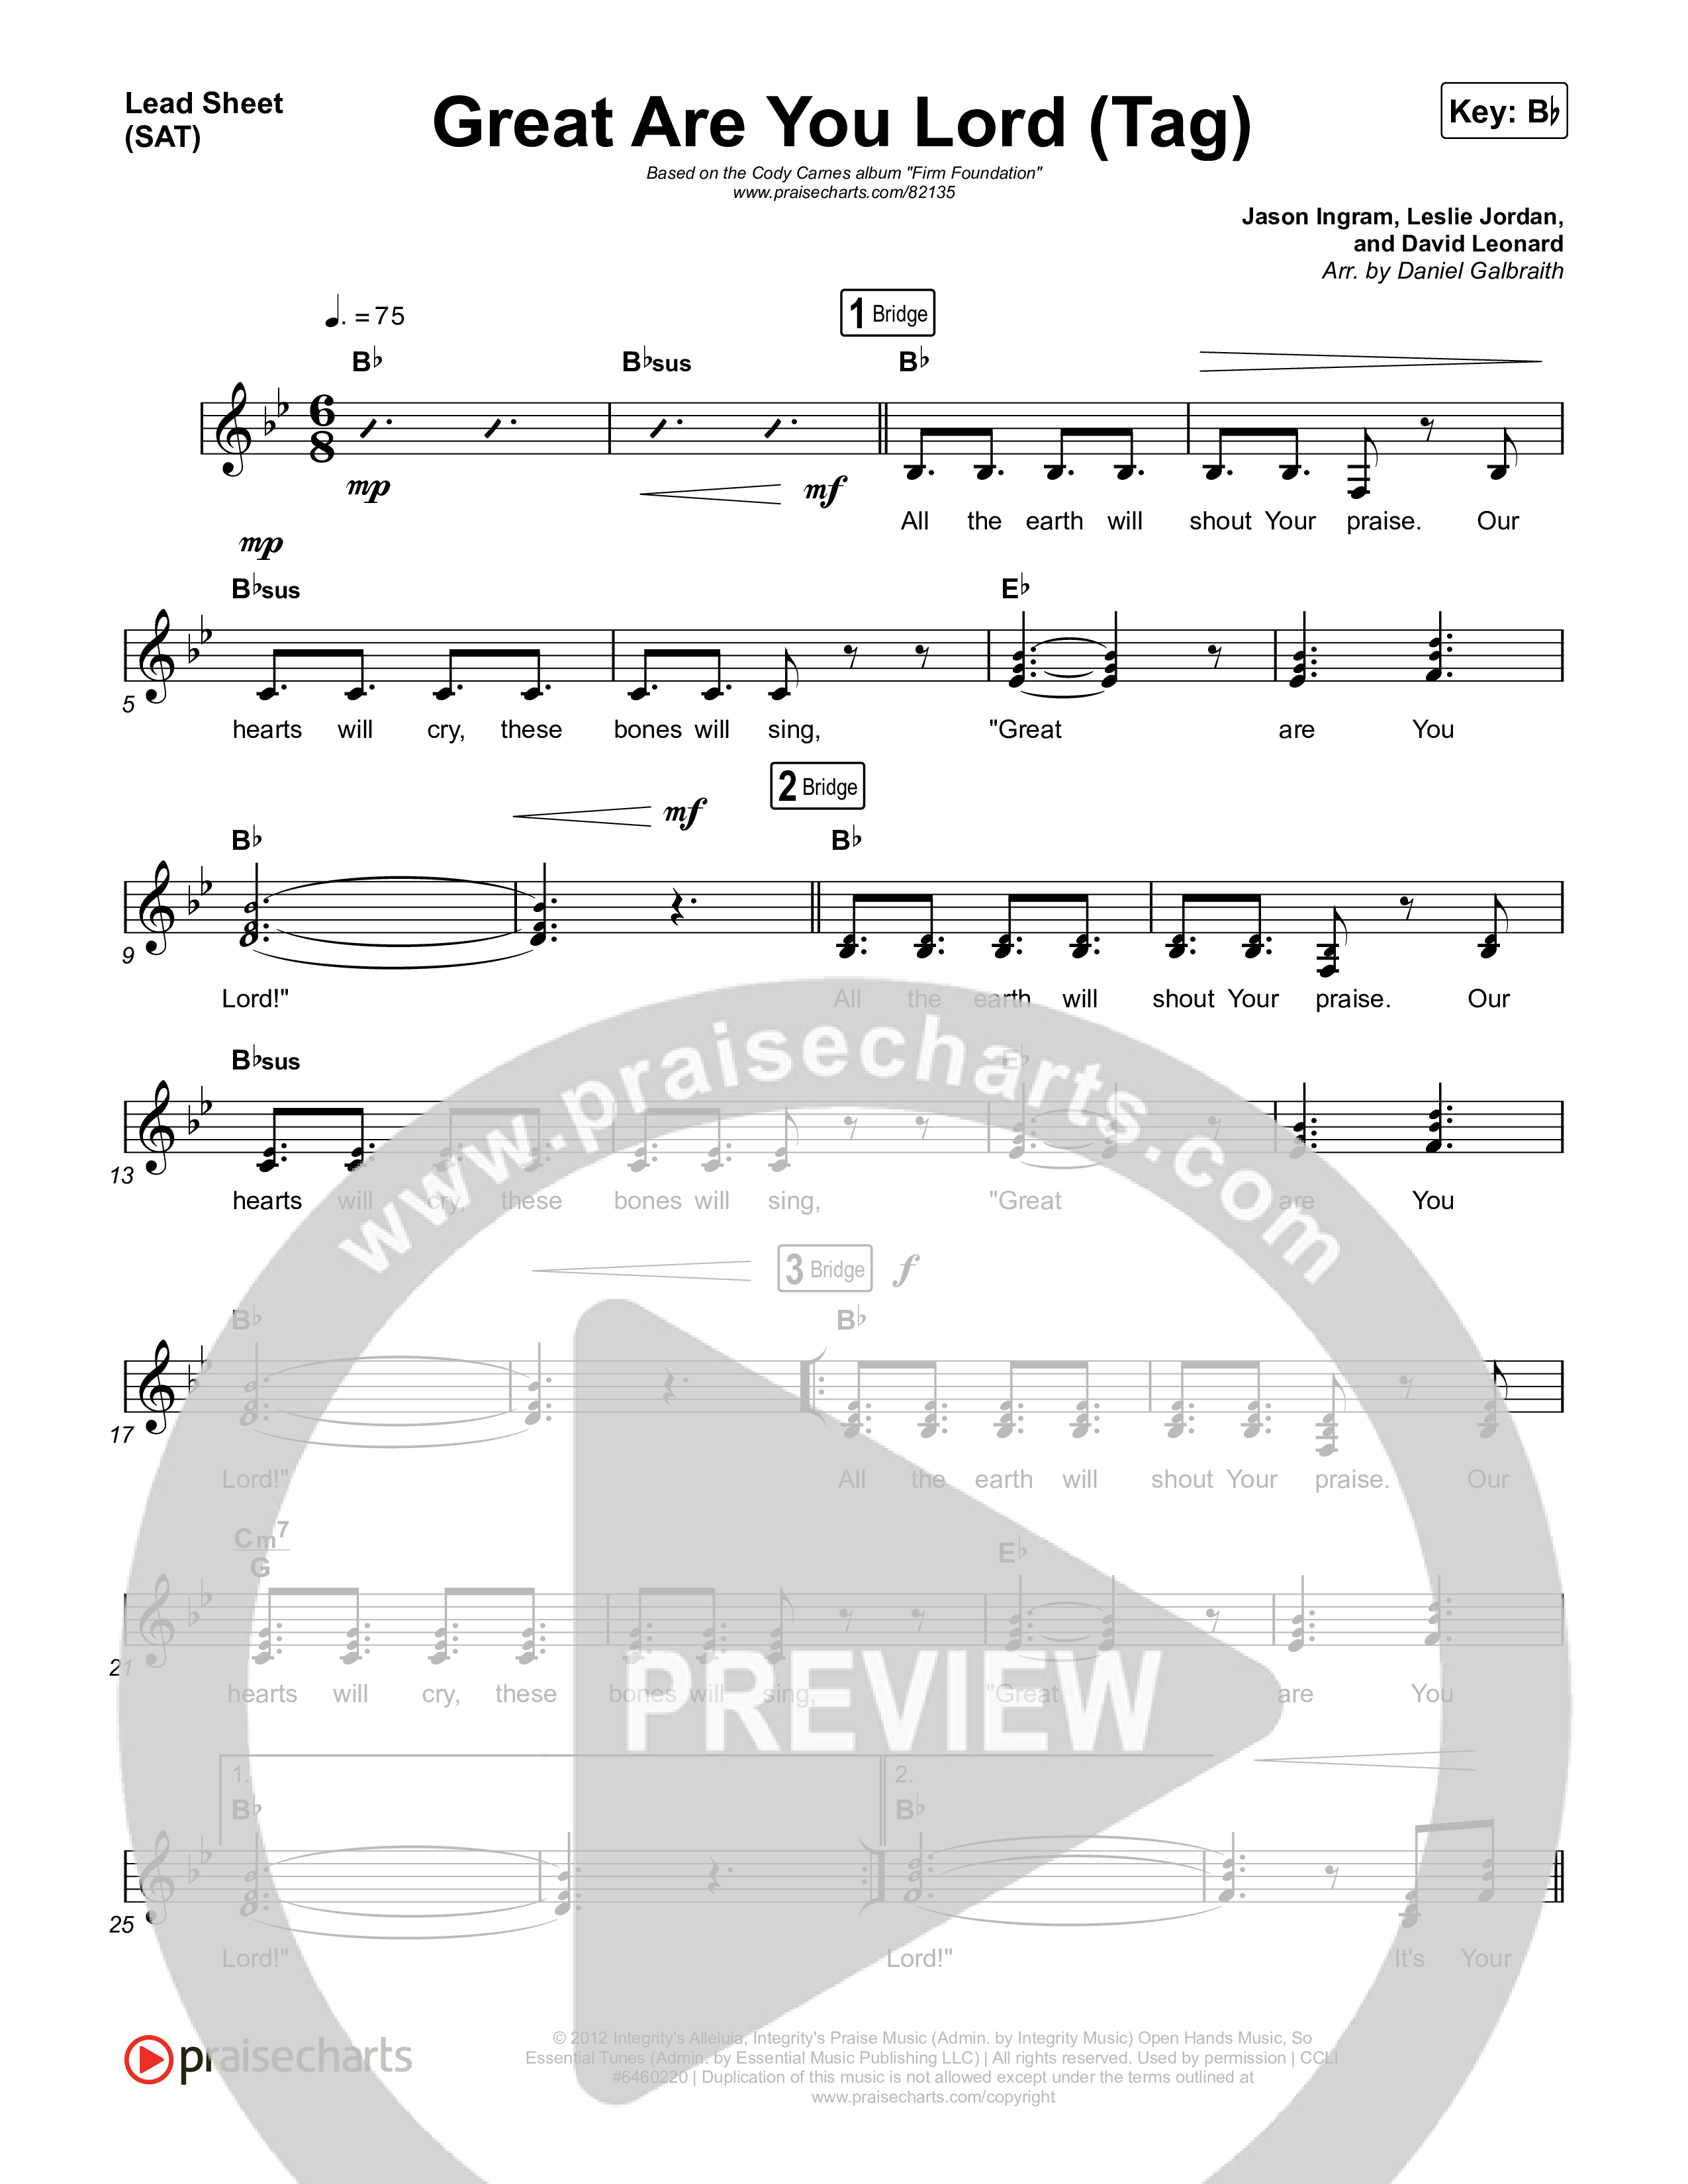 Great Are You Lord (Live) Lead Sheet (SAT) (Cody Carnes)